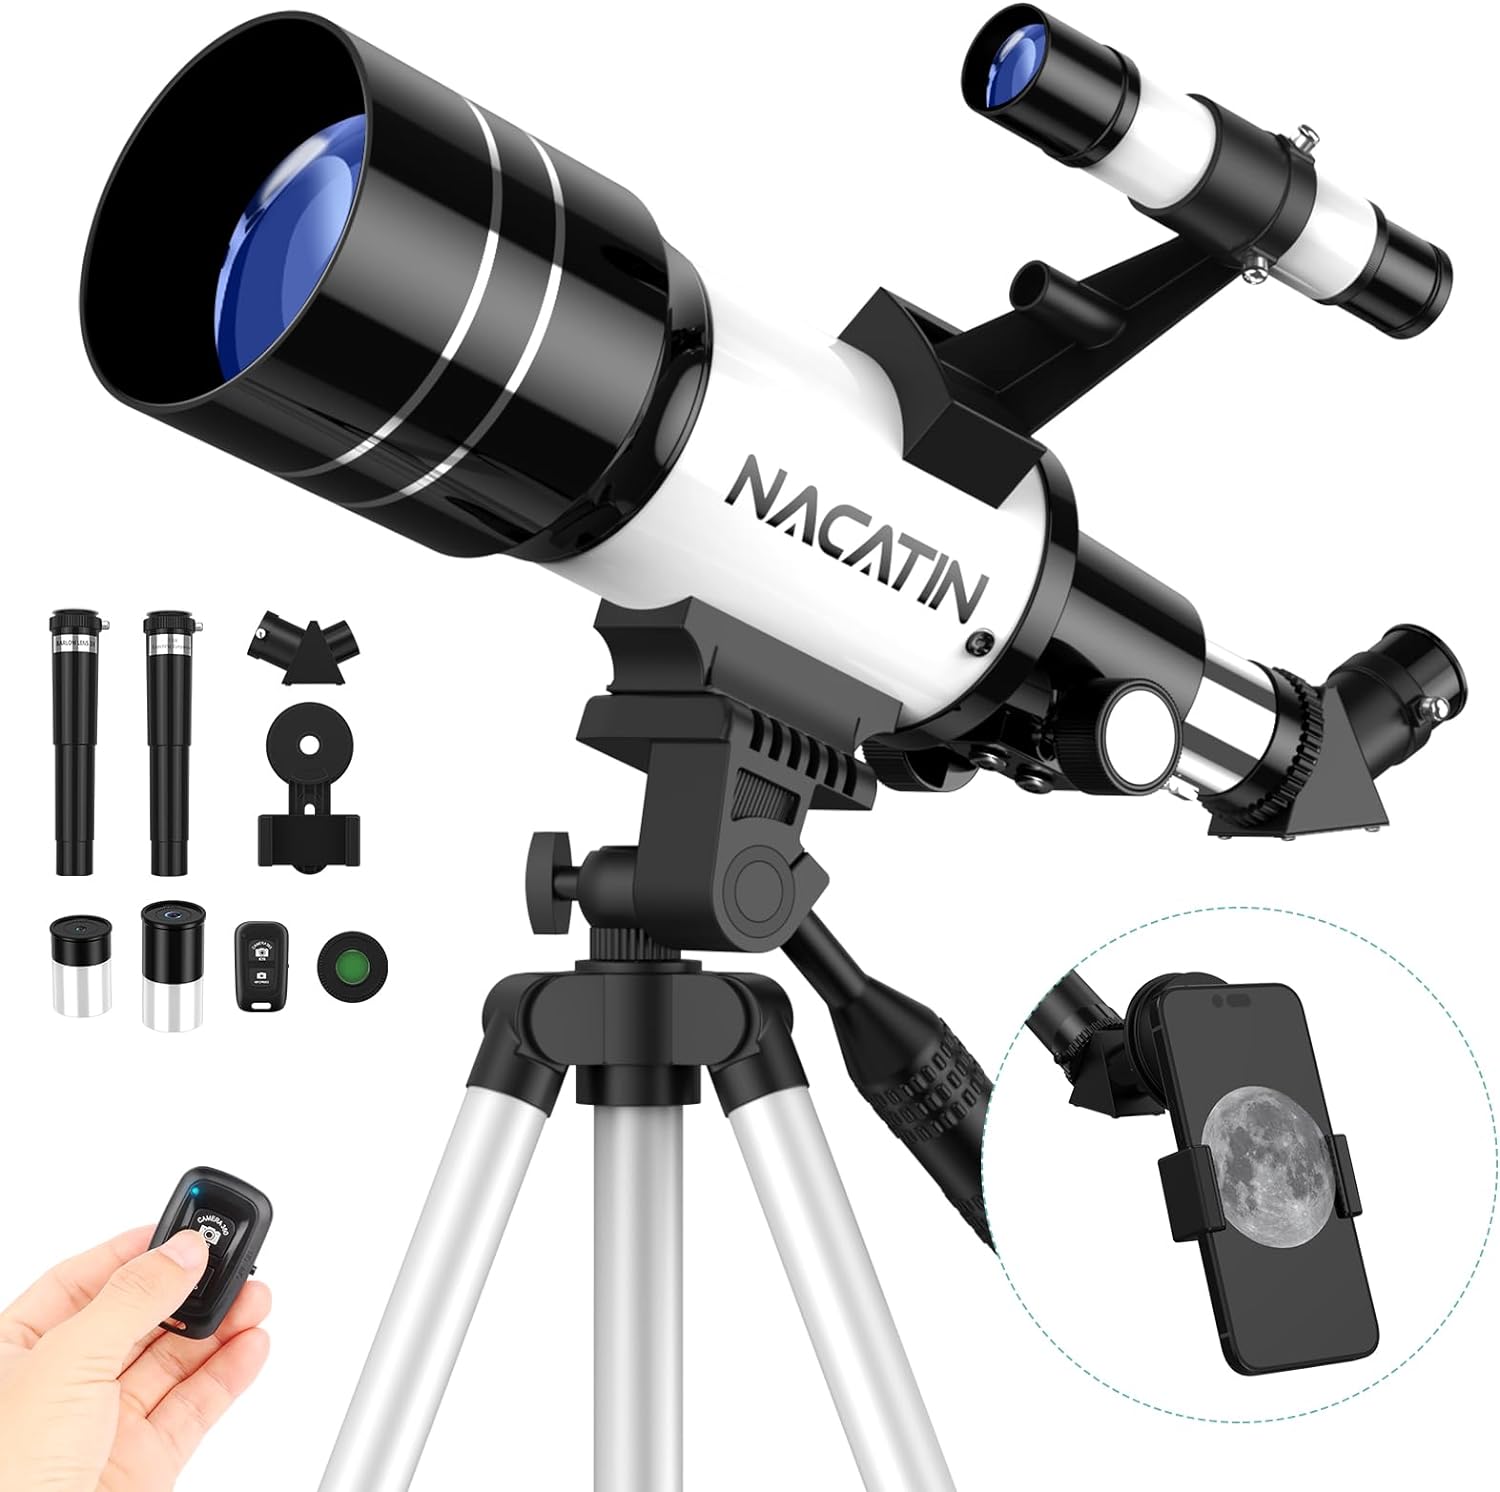 NACATIN 70mm Aperture Portable Refractor Telescope Review